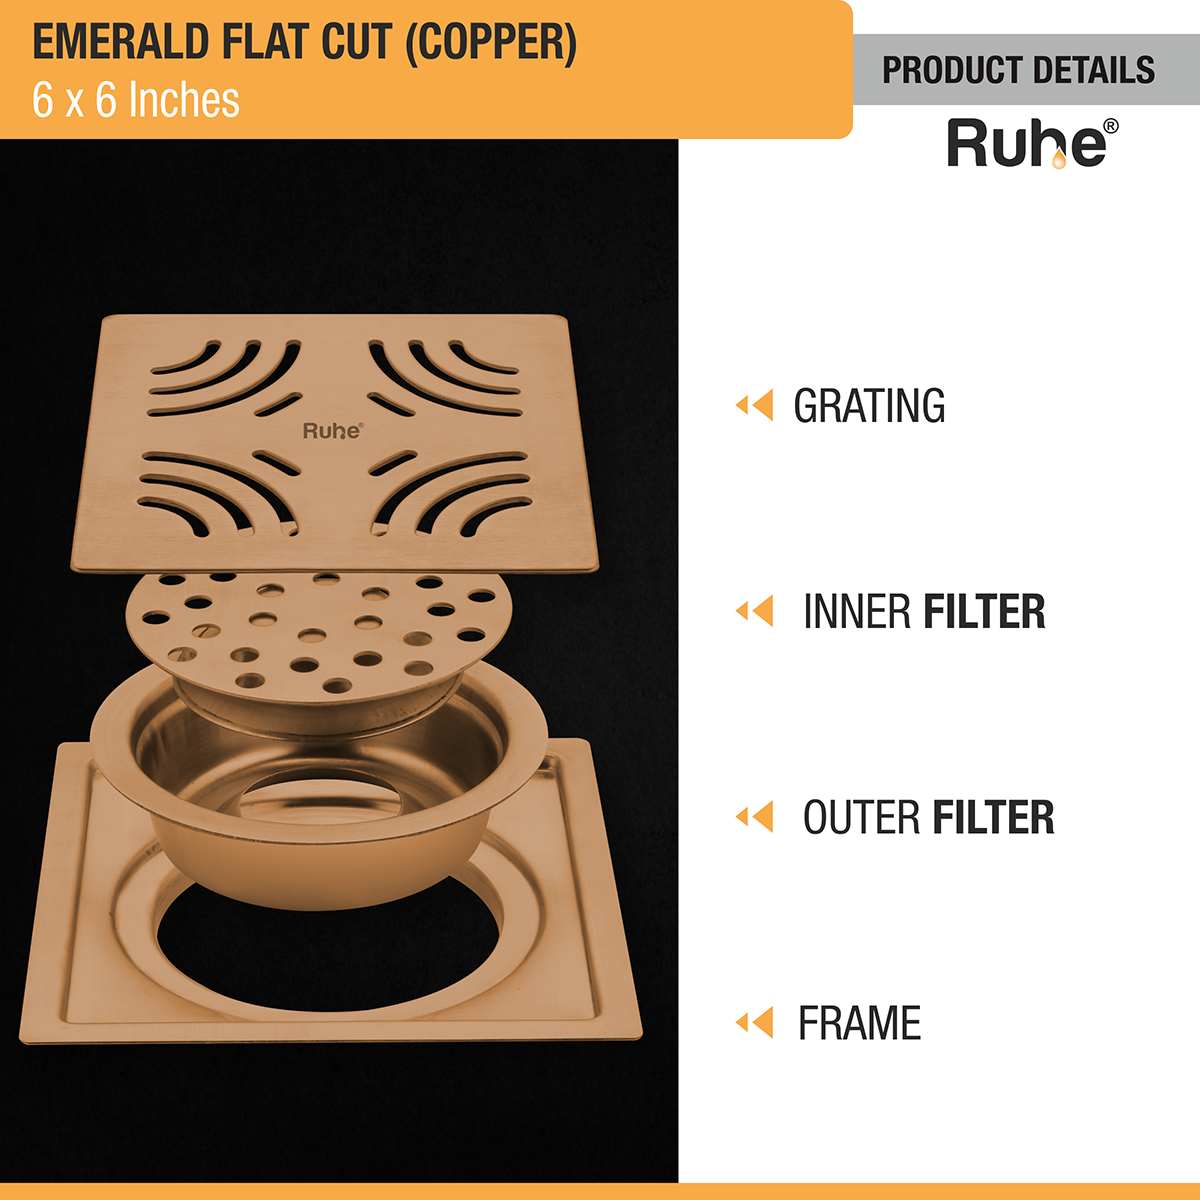 Emerald Square Flat Cut Floor Drain in Antique Copper PVD Coating (6 x 6 Inches) product details